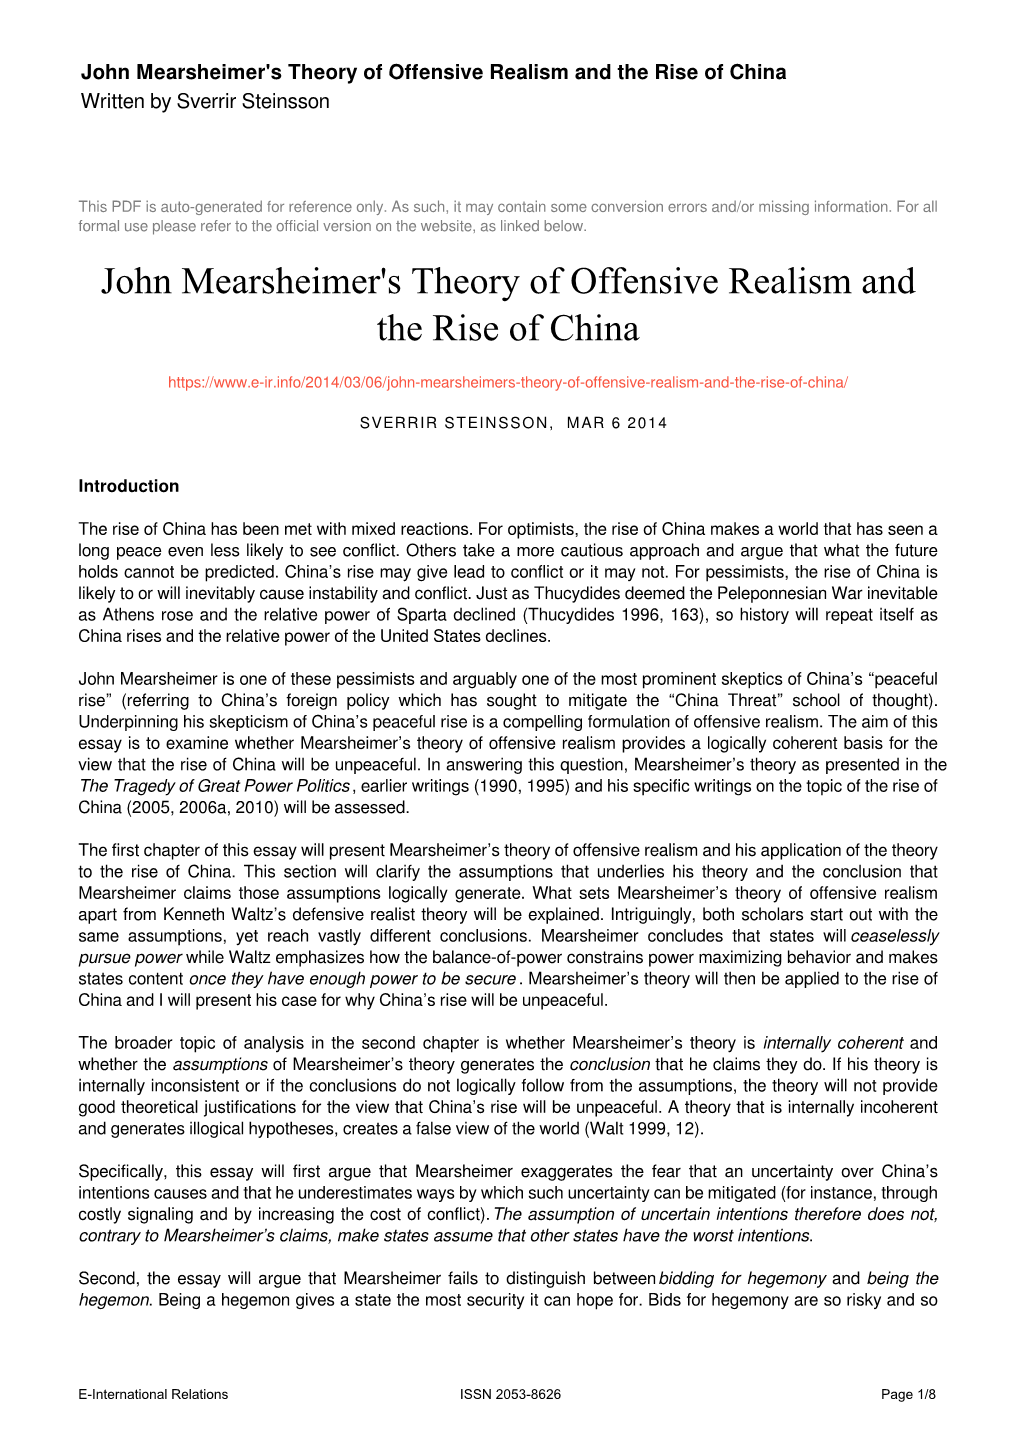 John Mearsheimer's Theory of Offensive Realism and the Rise of China Written by Sverrir Steinsson